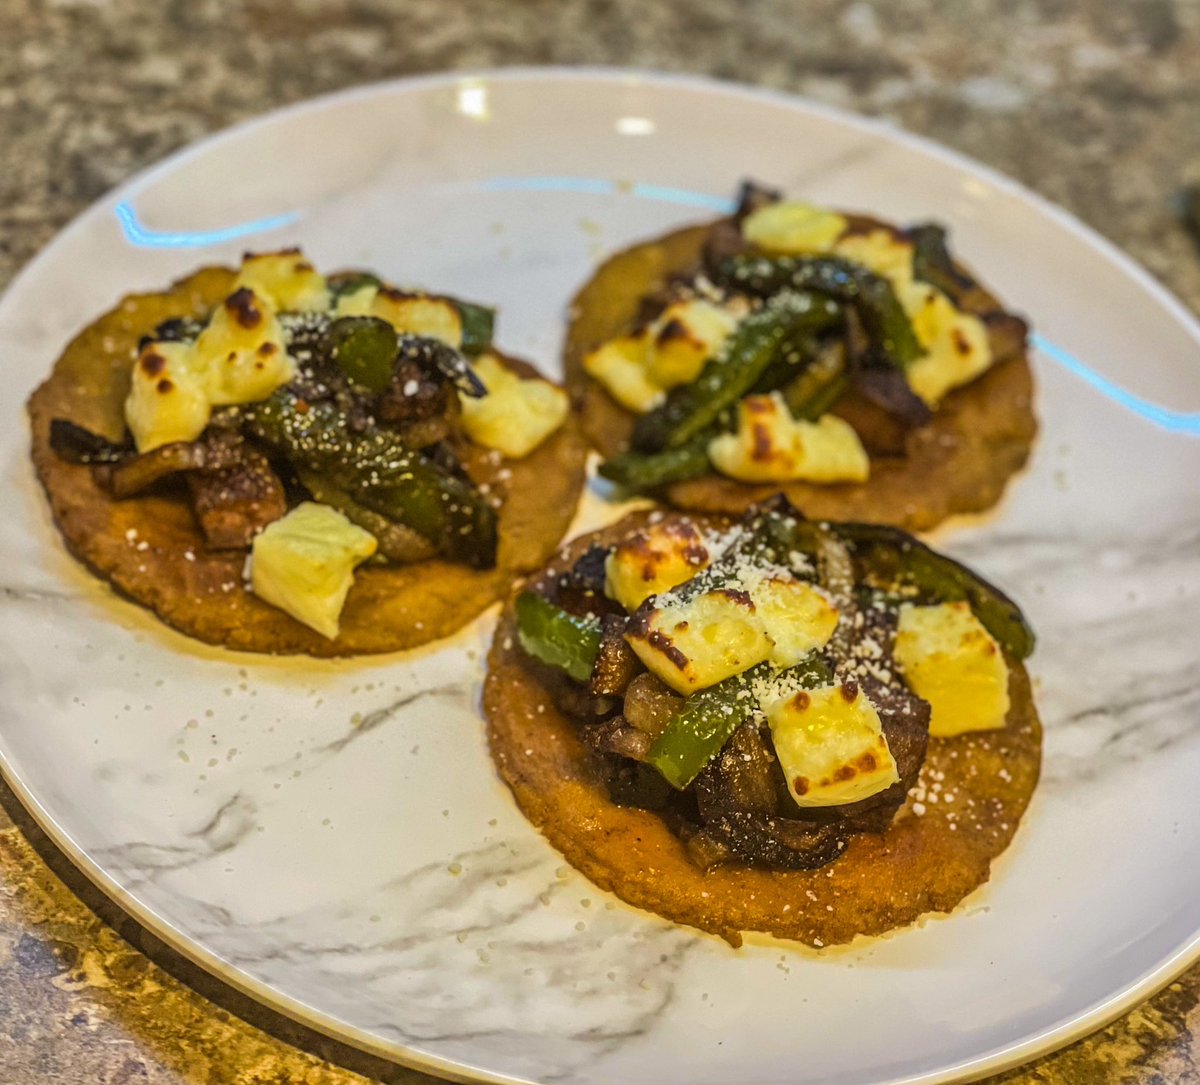 Philly meets Mexico; Homemade corn tortillas with spiced ribeye, onions and peppers topped with broiled Queso Blanco and sprinkled with Cotija #cook #cookwithme #homemadefood #foodtok #homecooking #foodlovers #comfortfood #deliciousness #homemade #dinnerideas #food #tasty